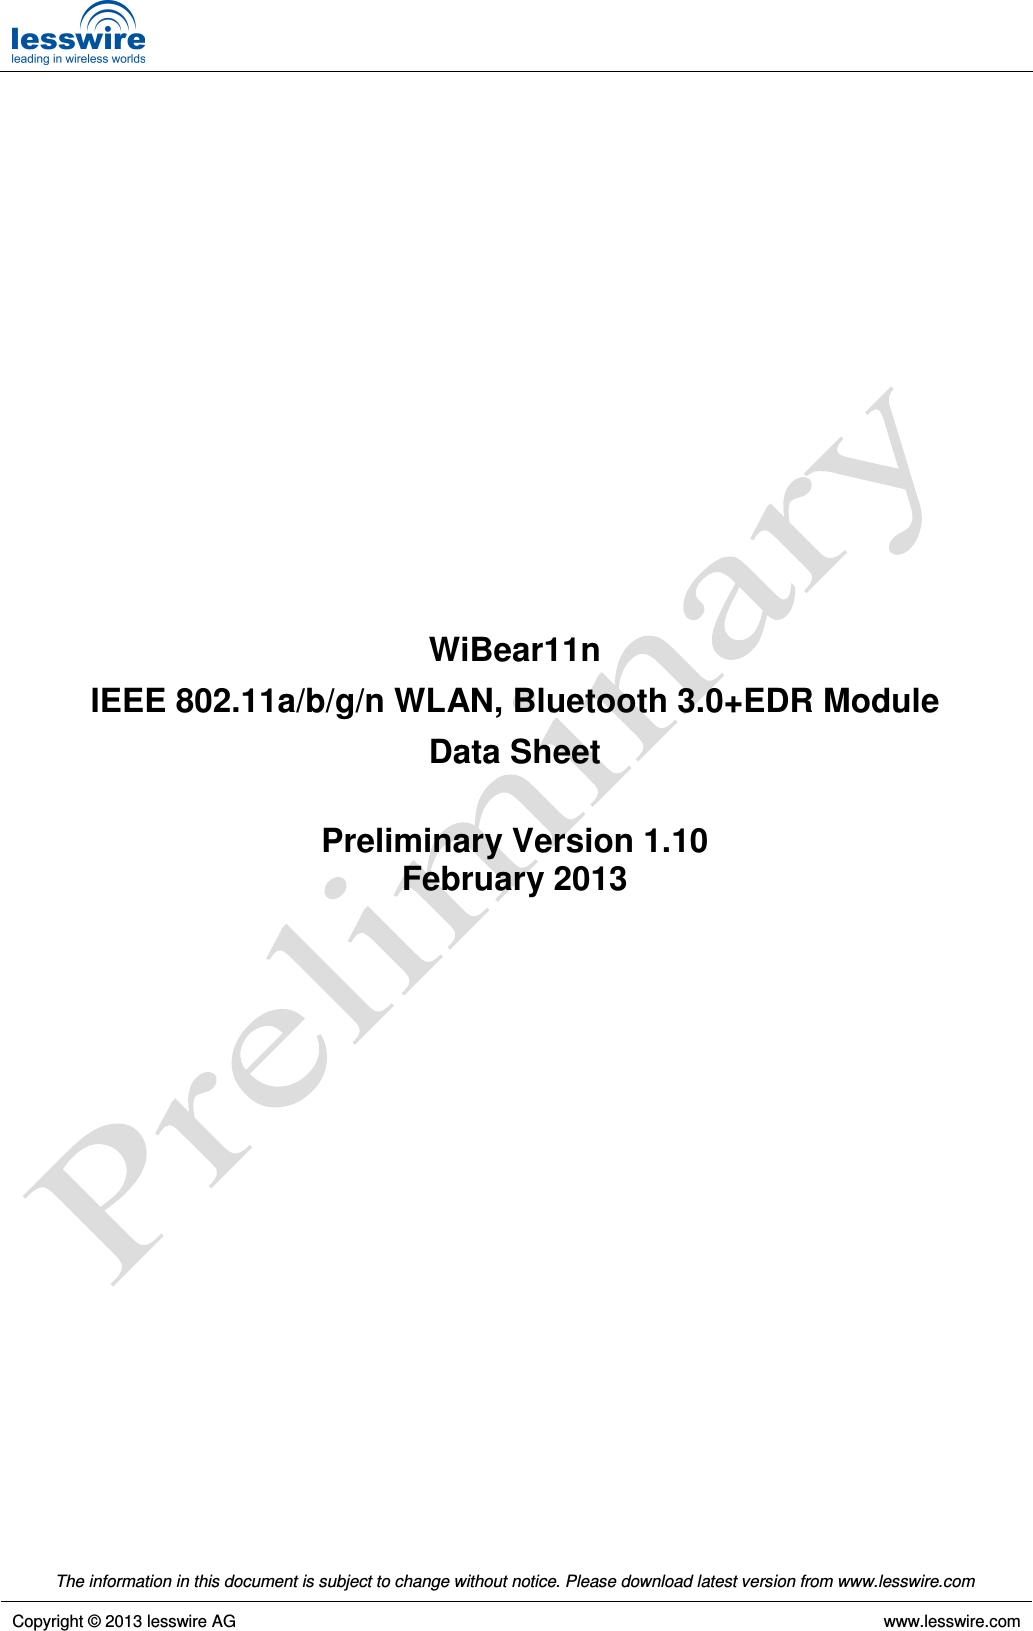   The information in this document is subject to change without notice. Please download latest version from www.lesswire.com   Copyright © 2013 lesswire AG     www.lesswire.com                    WiBear11n IEEE 802.11a/b/g/n WLAN, Bluetooth 3.0+EDR Module Data Sheet  Preliminary Version 1.10  February 2013         